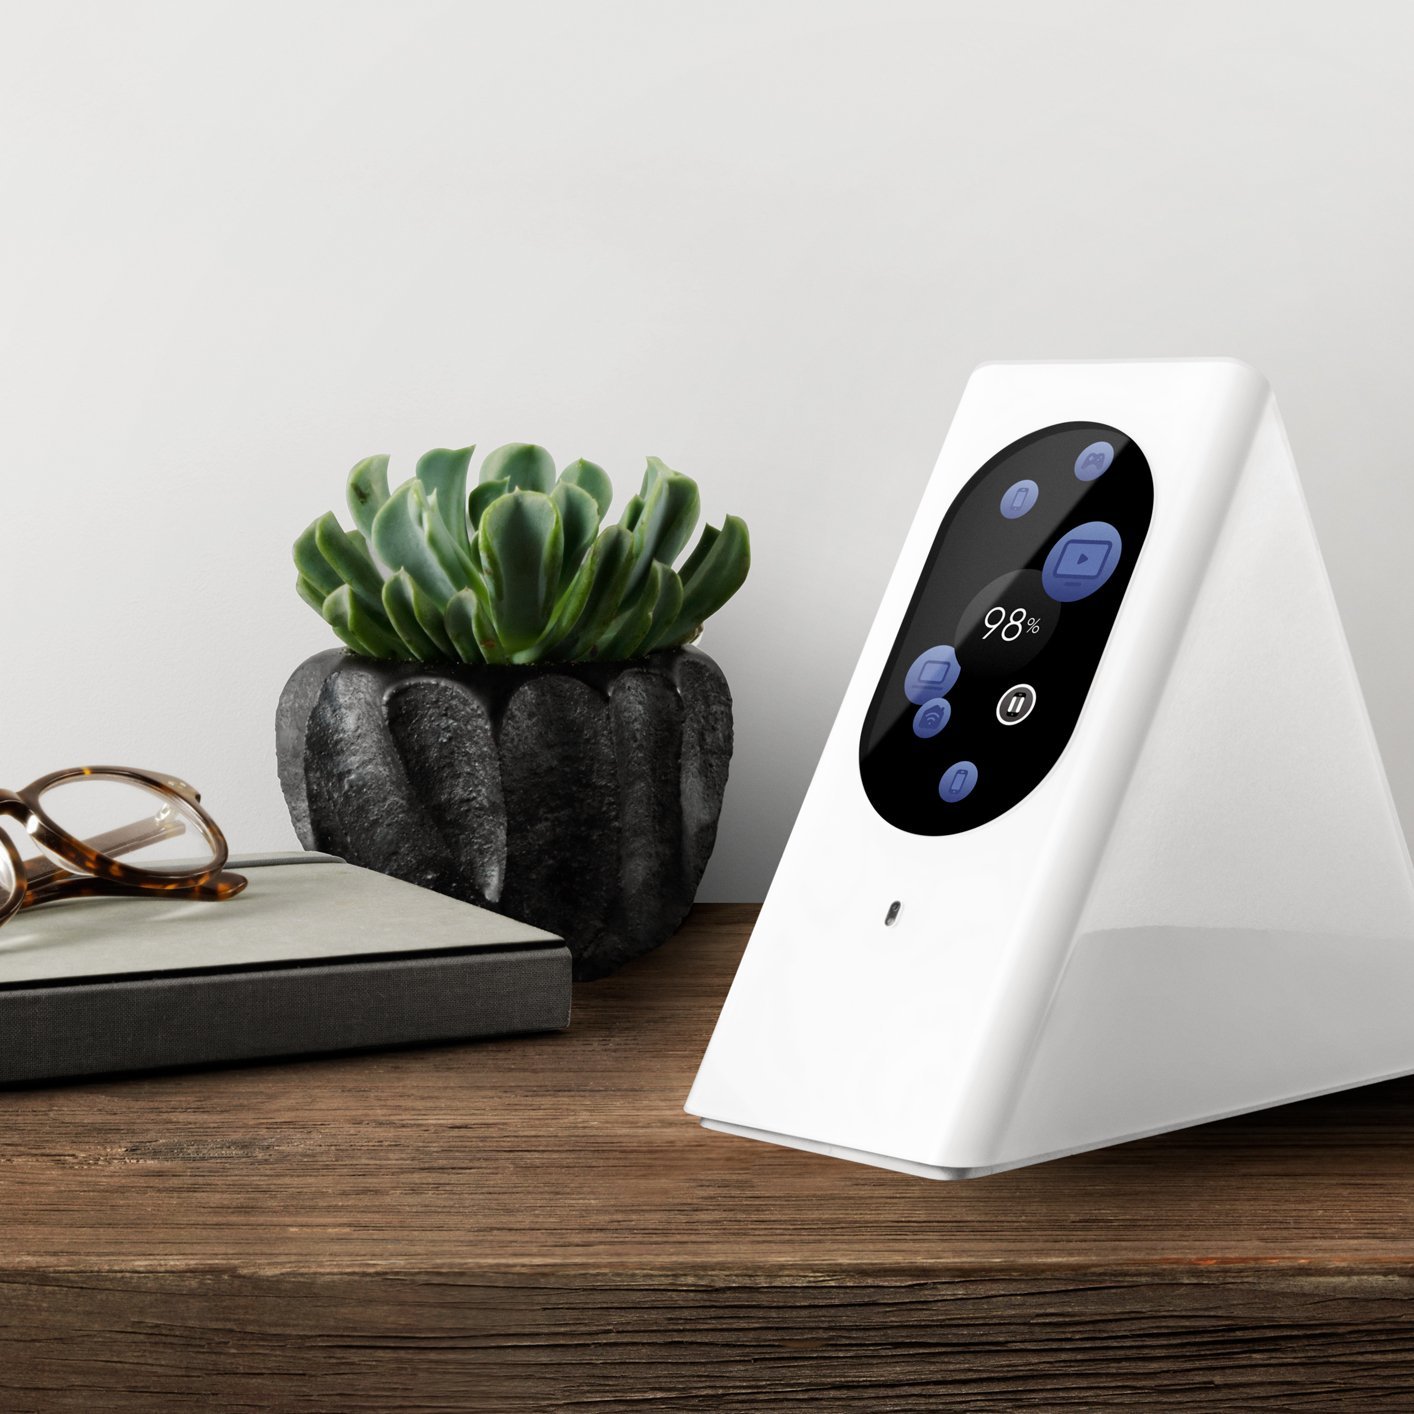 Starry Station – Touchscreen WiFi Router